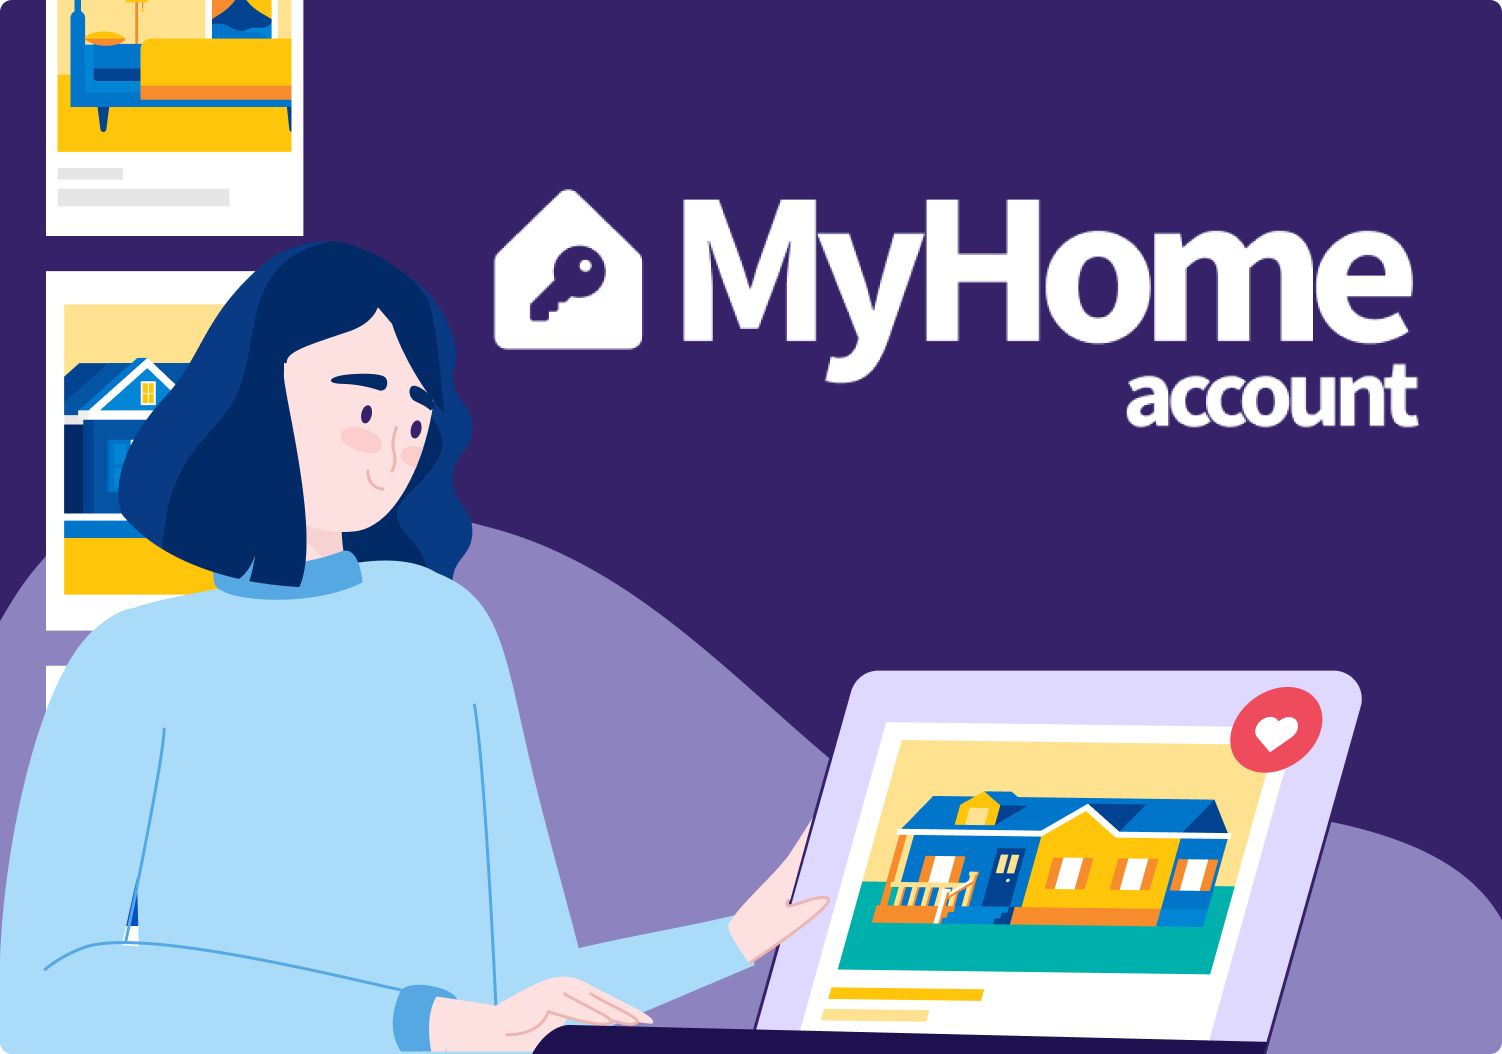 Create a MyHome account to keep track of your favorite homes!